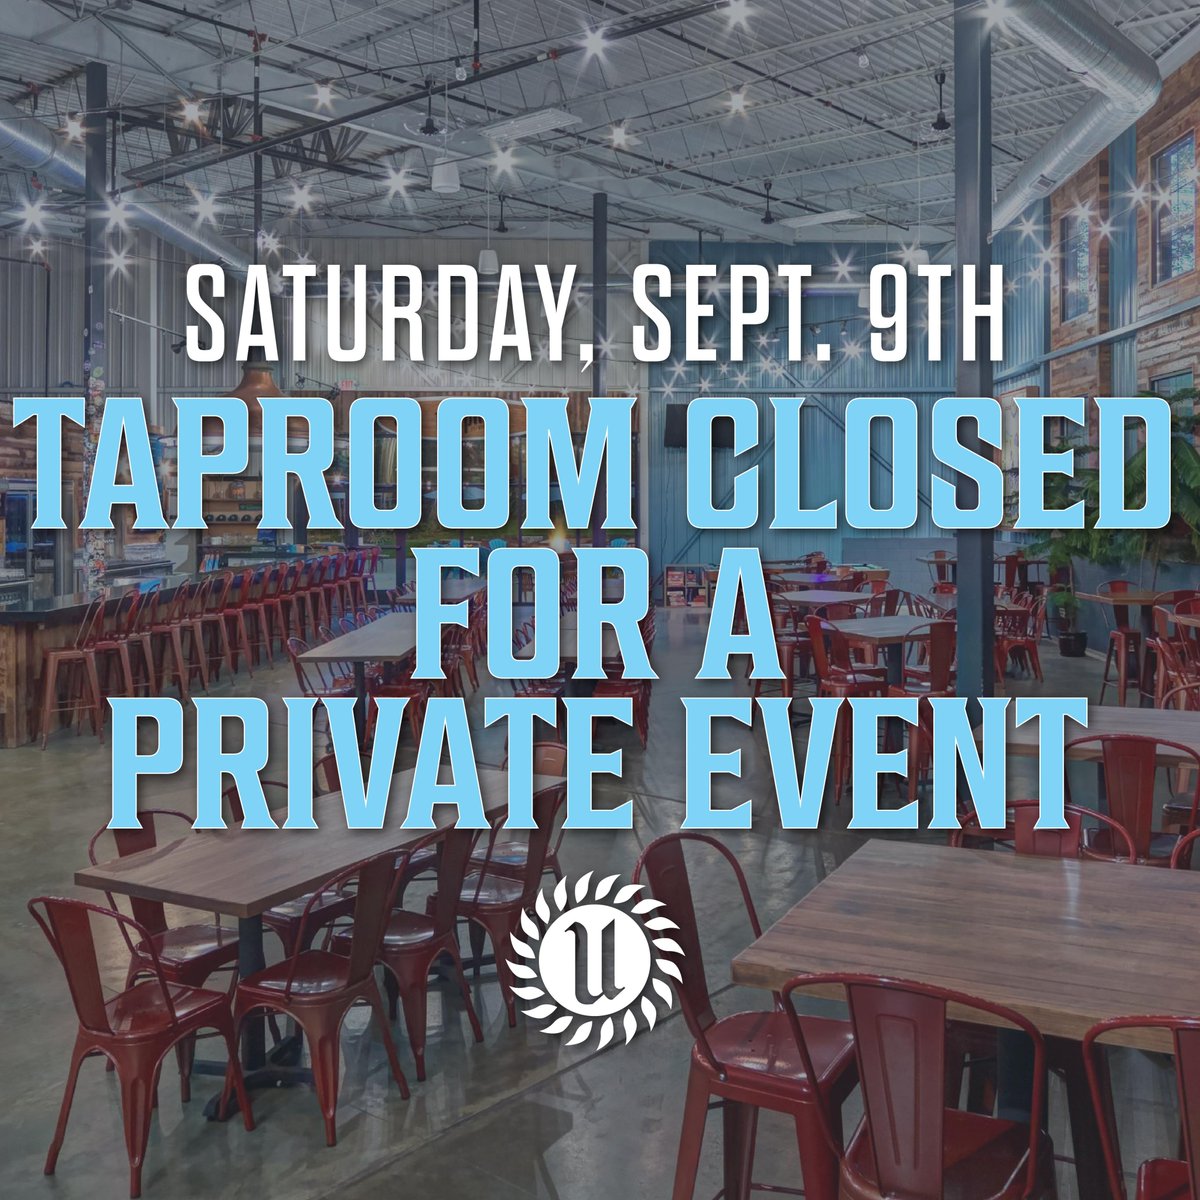 ❗❗This Saturday we will be CLOSED for a Private Event!❗❗ We will be back open the following Sunday at regular hours. We apologize for any inconvenience. Cheers! 🍻